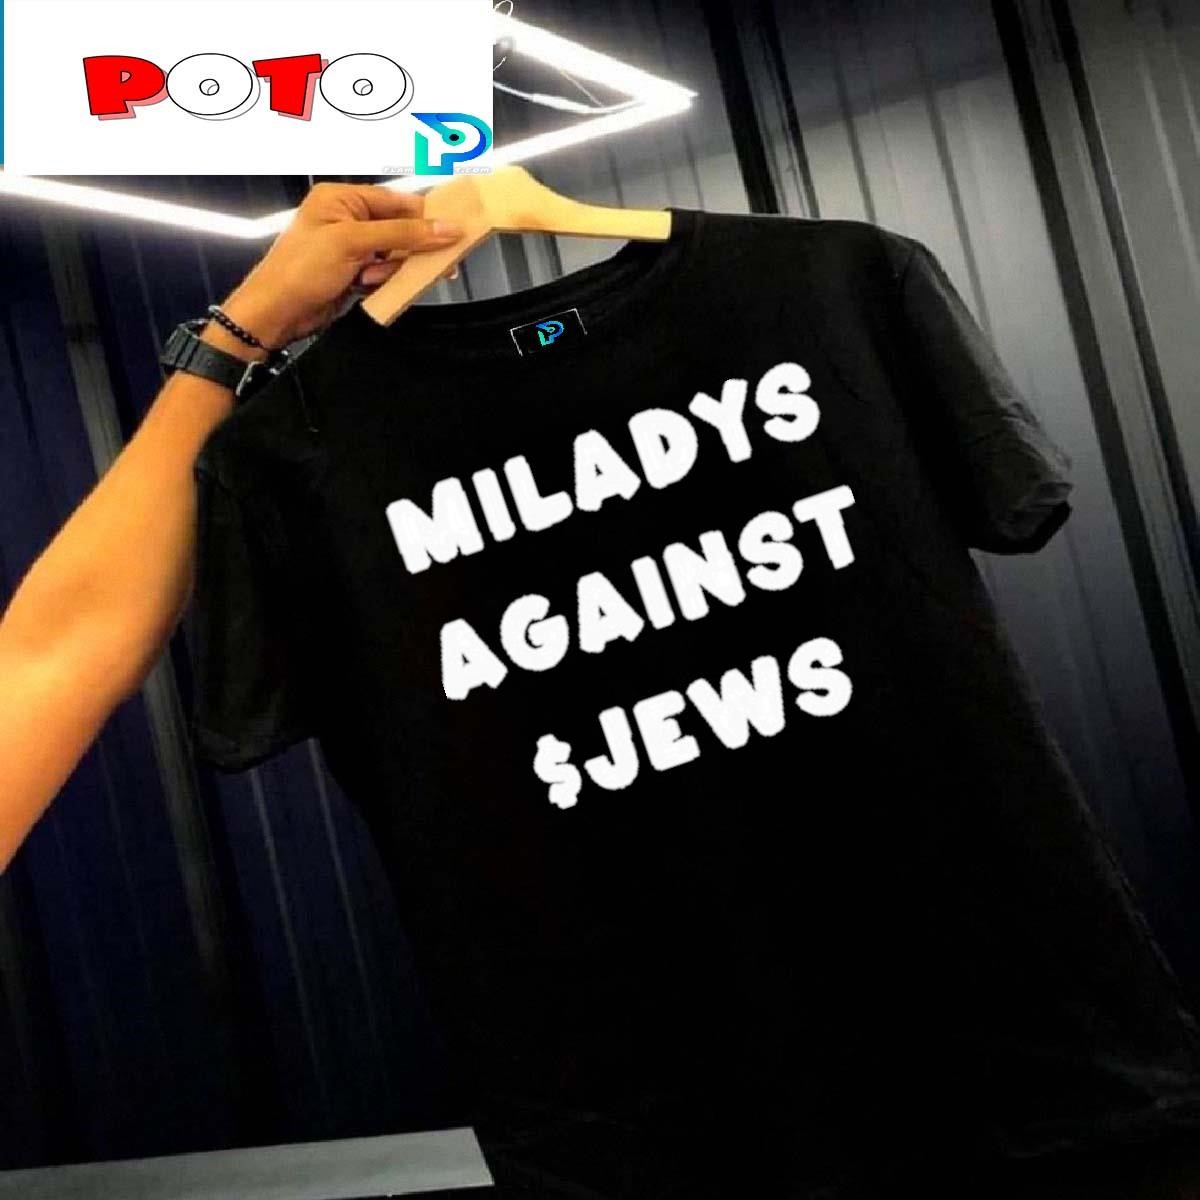 Official Miladys Against Jews Shirt, hoodie, sweater, long sleeve and tank  top